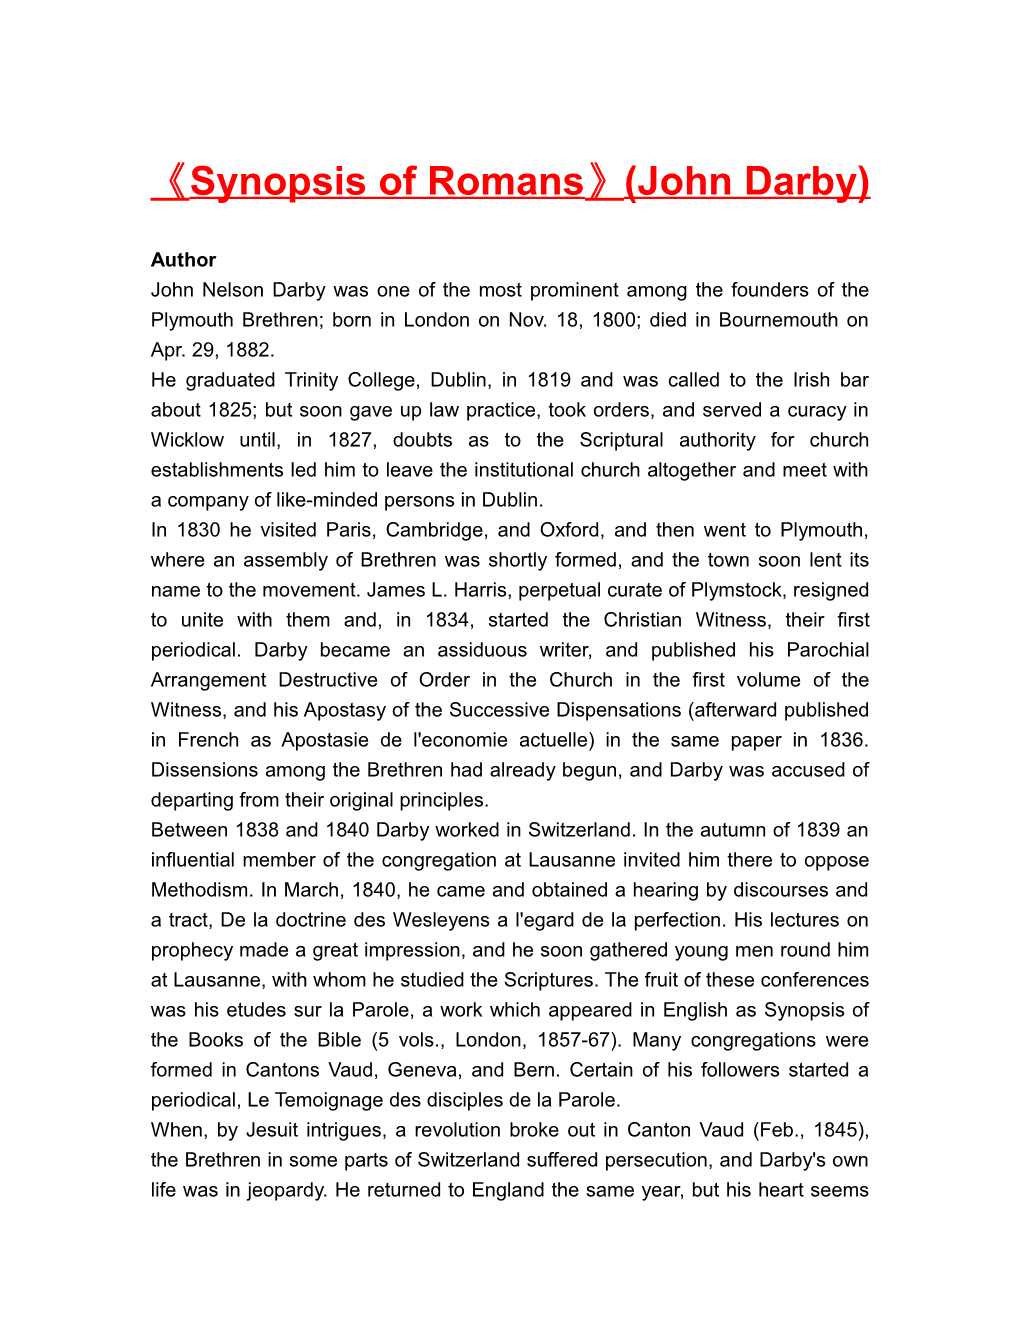 Synopsis of Romans (John Darby)